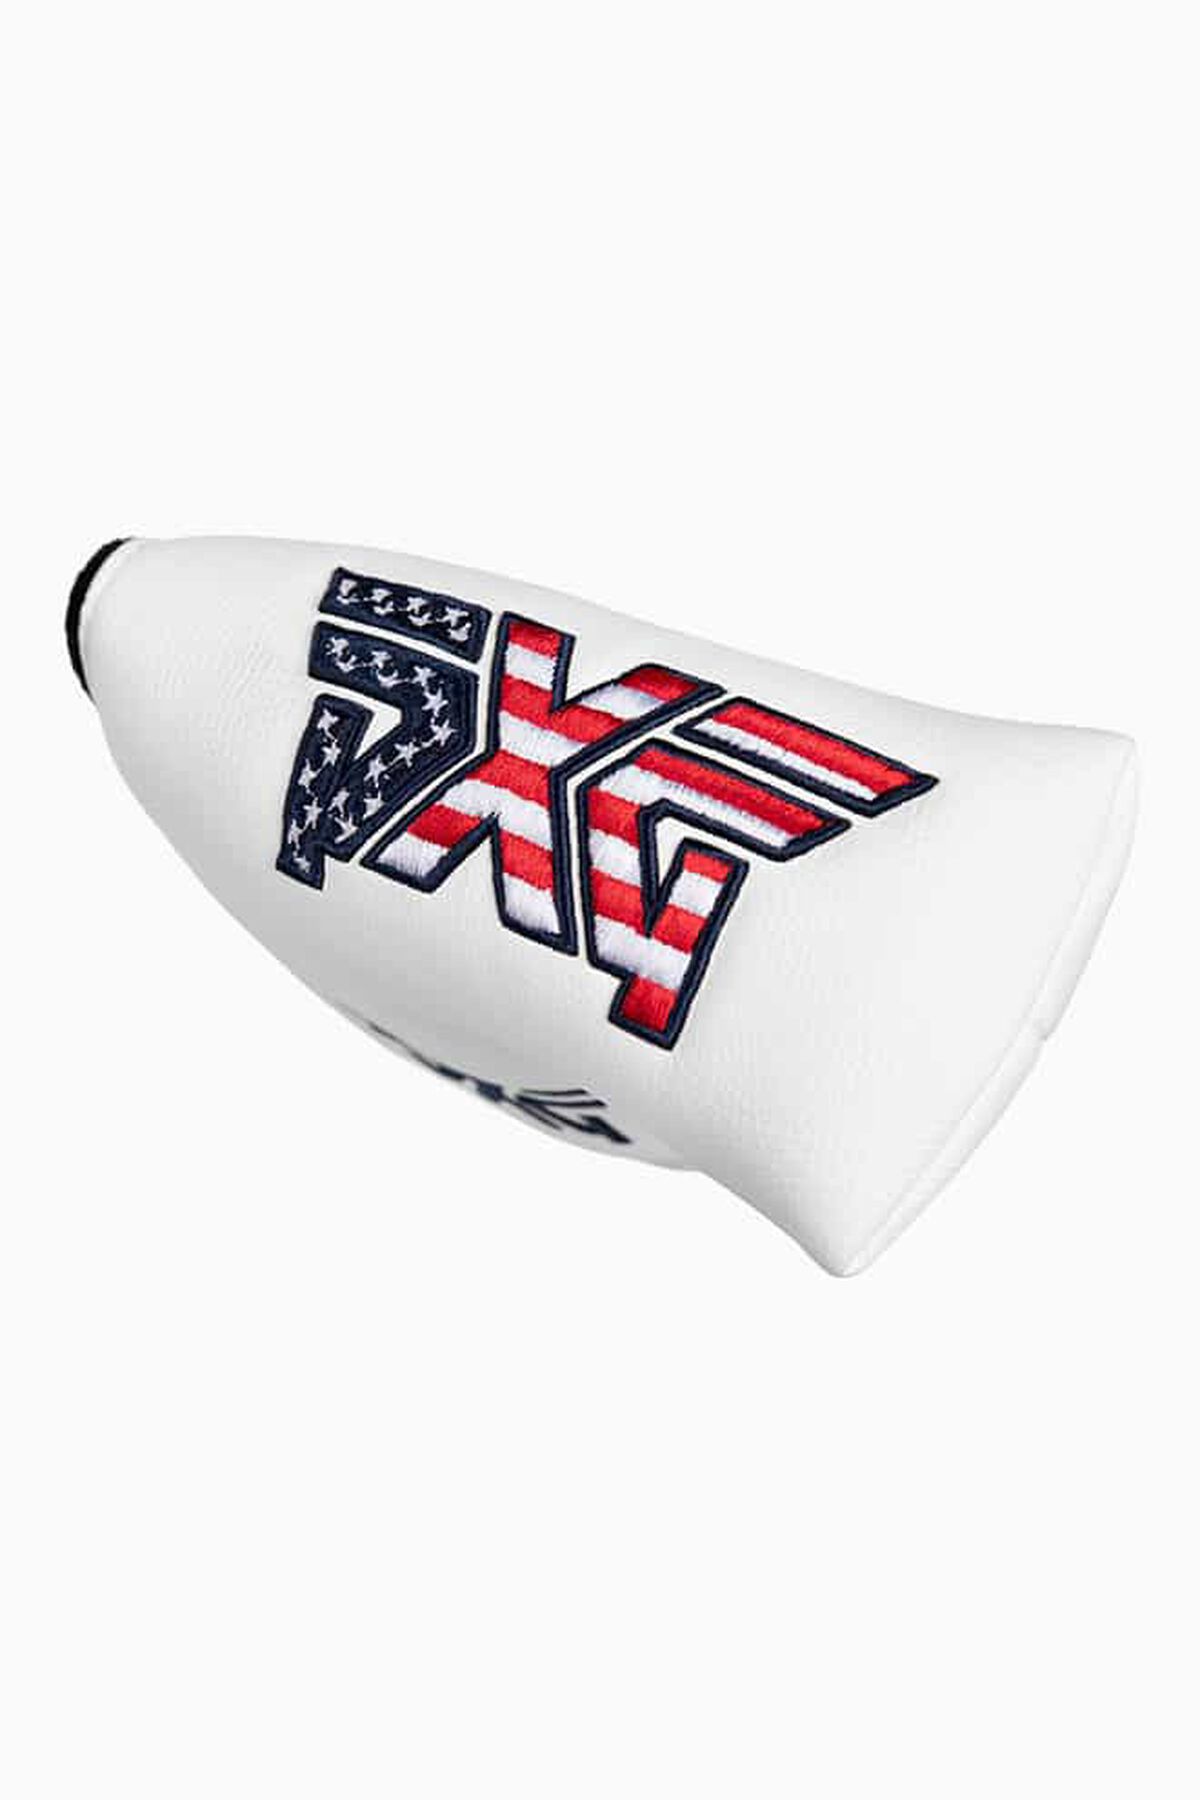 Pure Stars & Stripes Players Blade Putter Headcover 